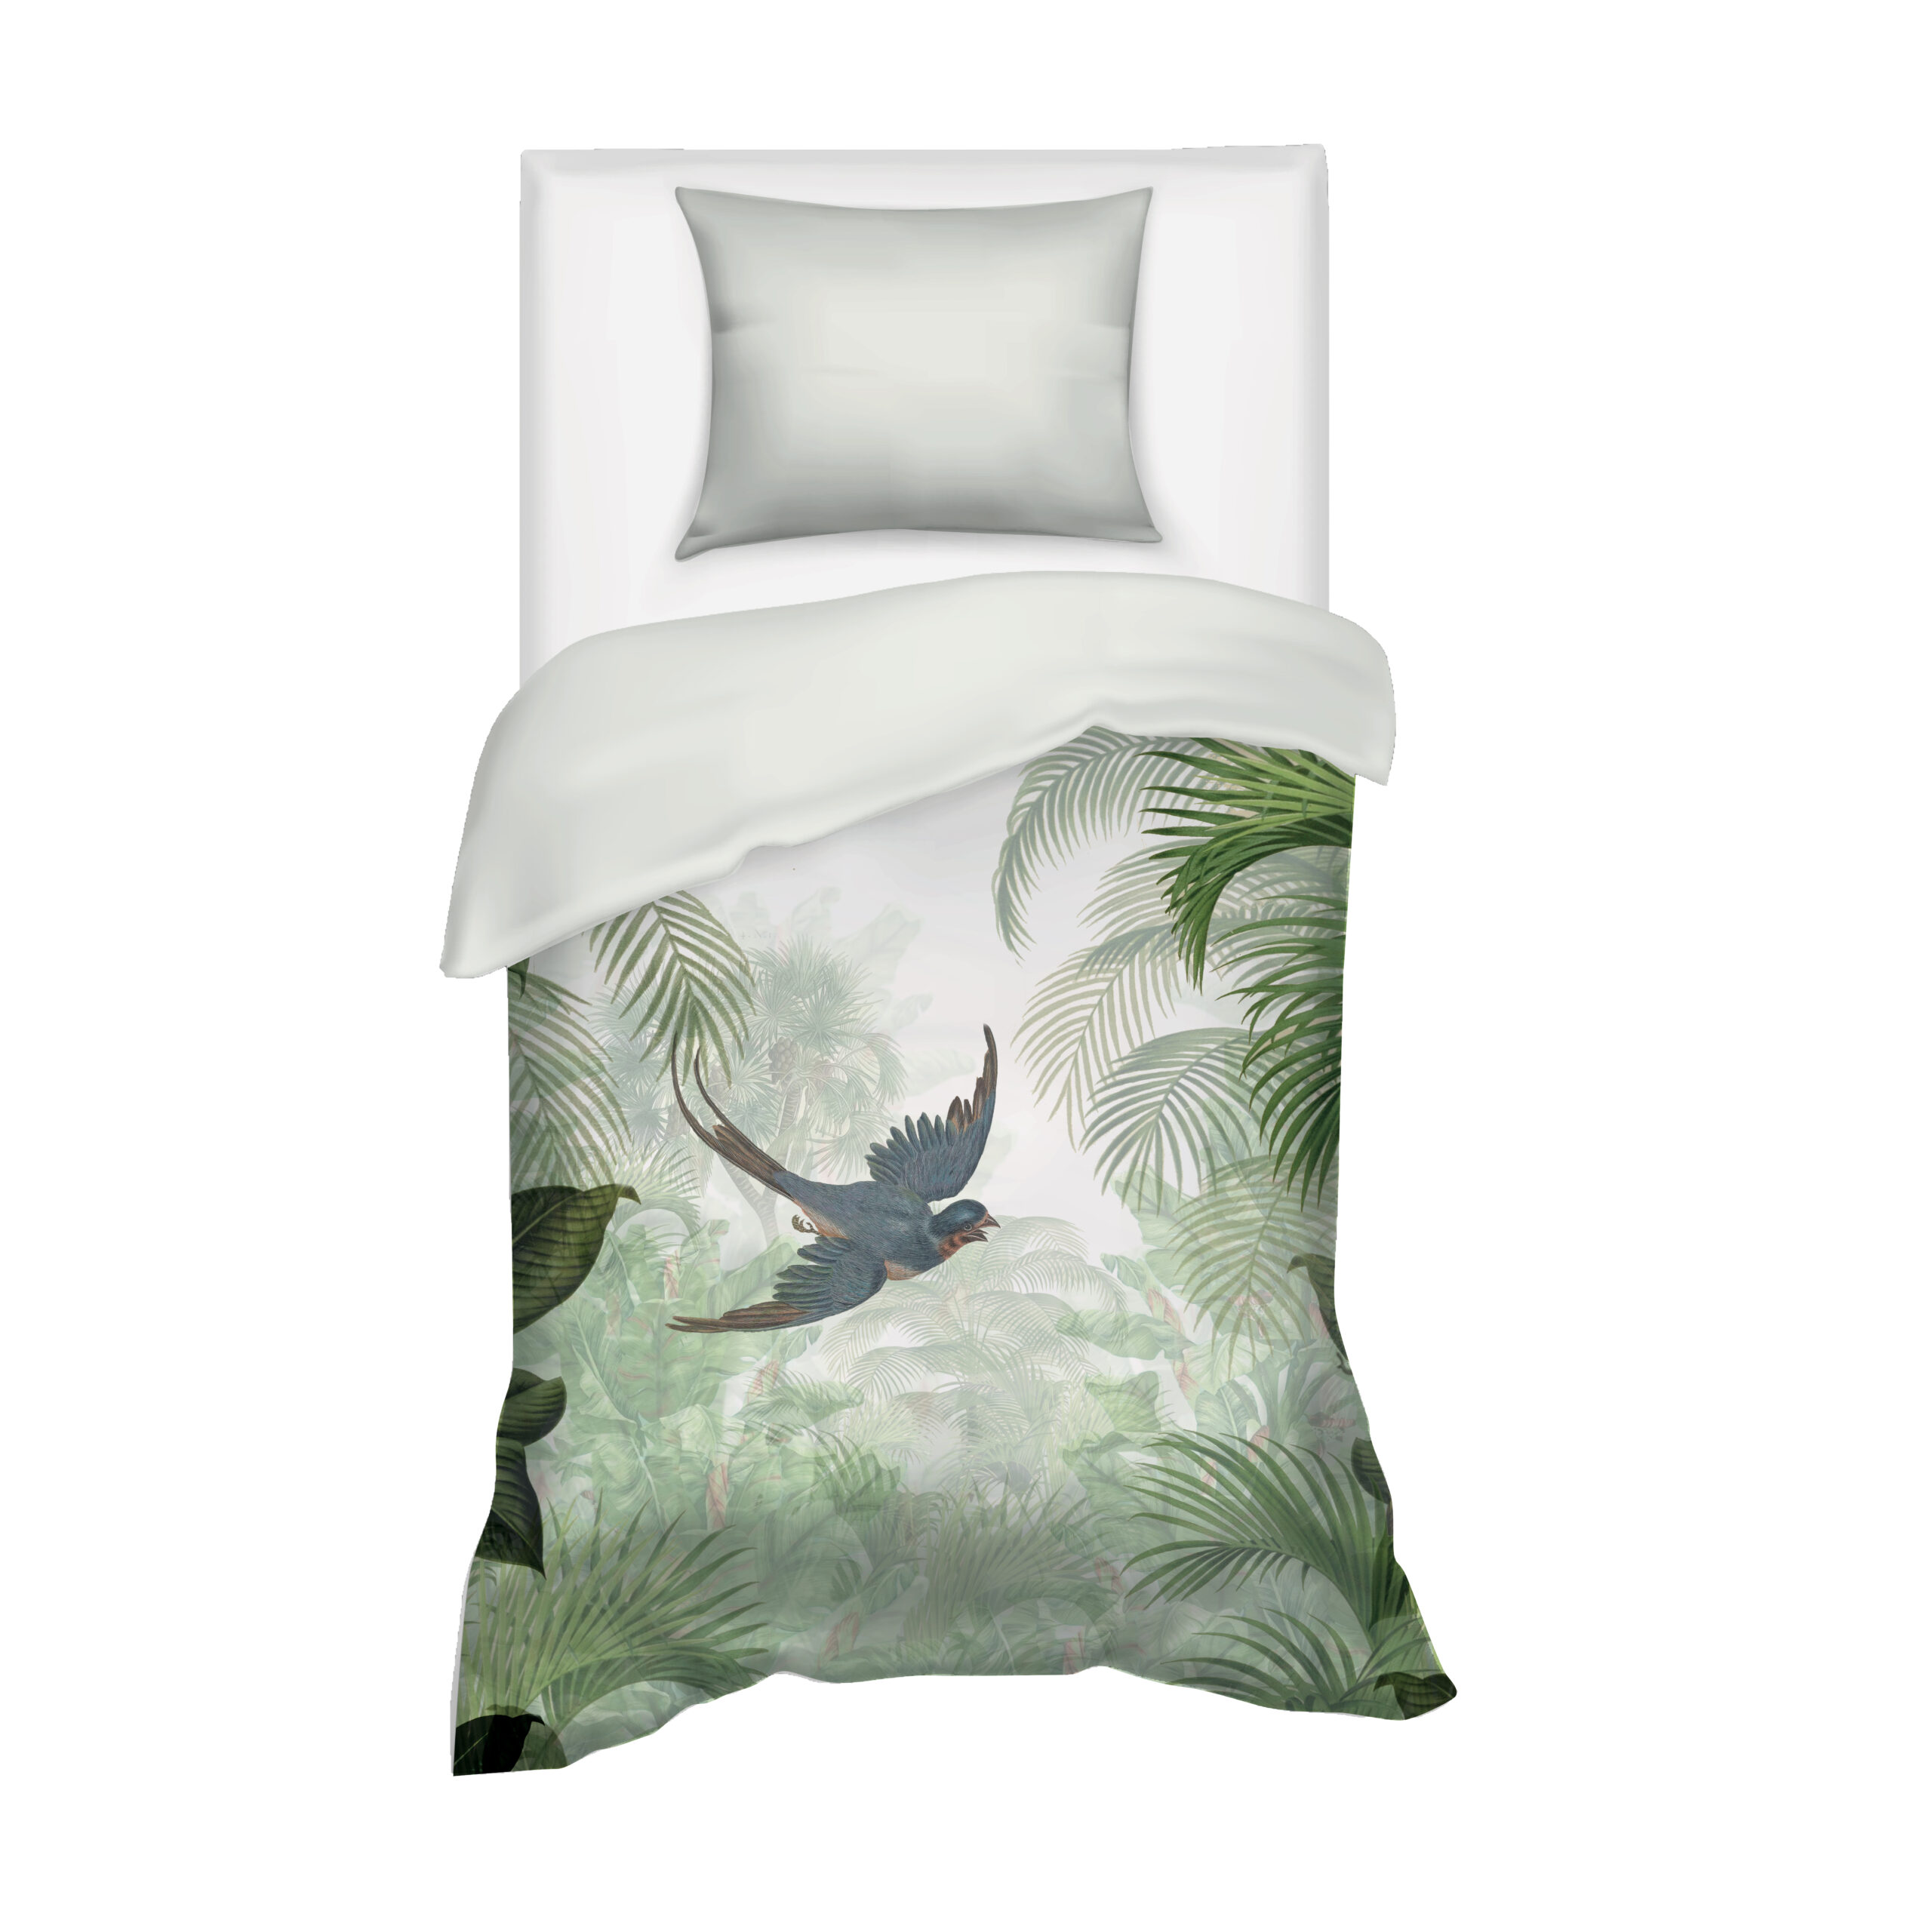 Villa Madelief 100 x 135cm White Green Jungle Toddlers Duvet Cover with 1 Pillowcase